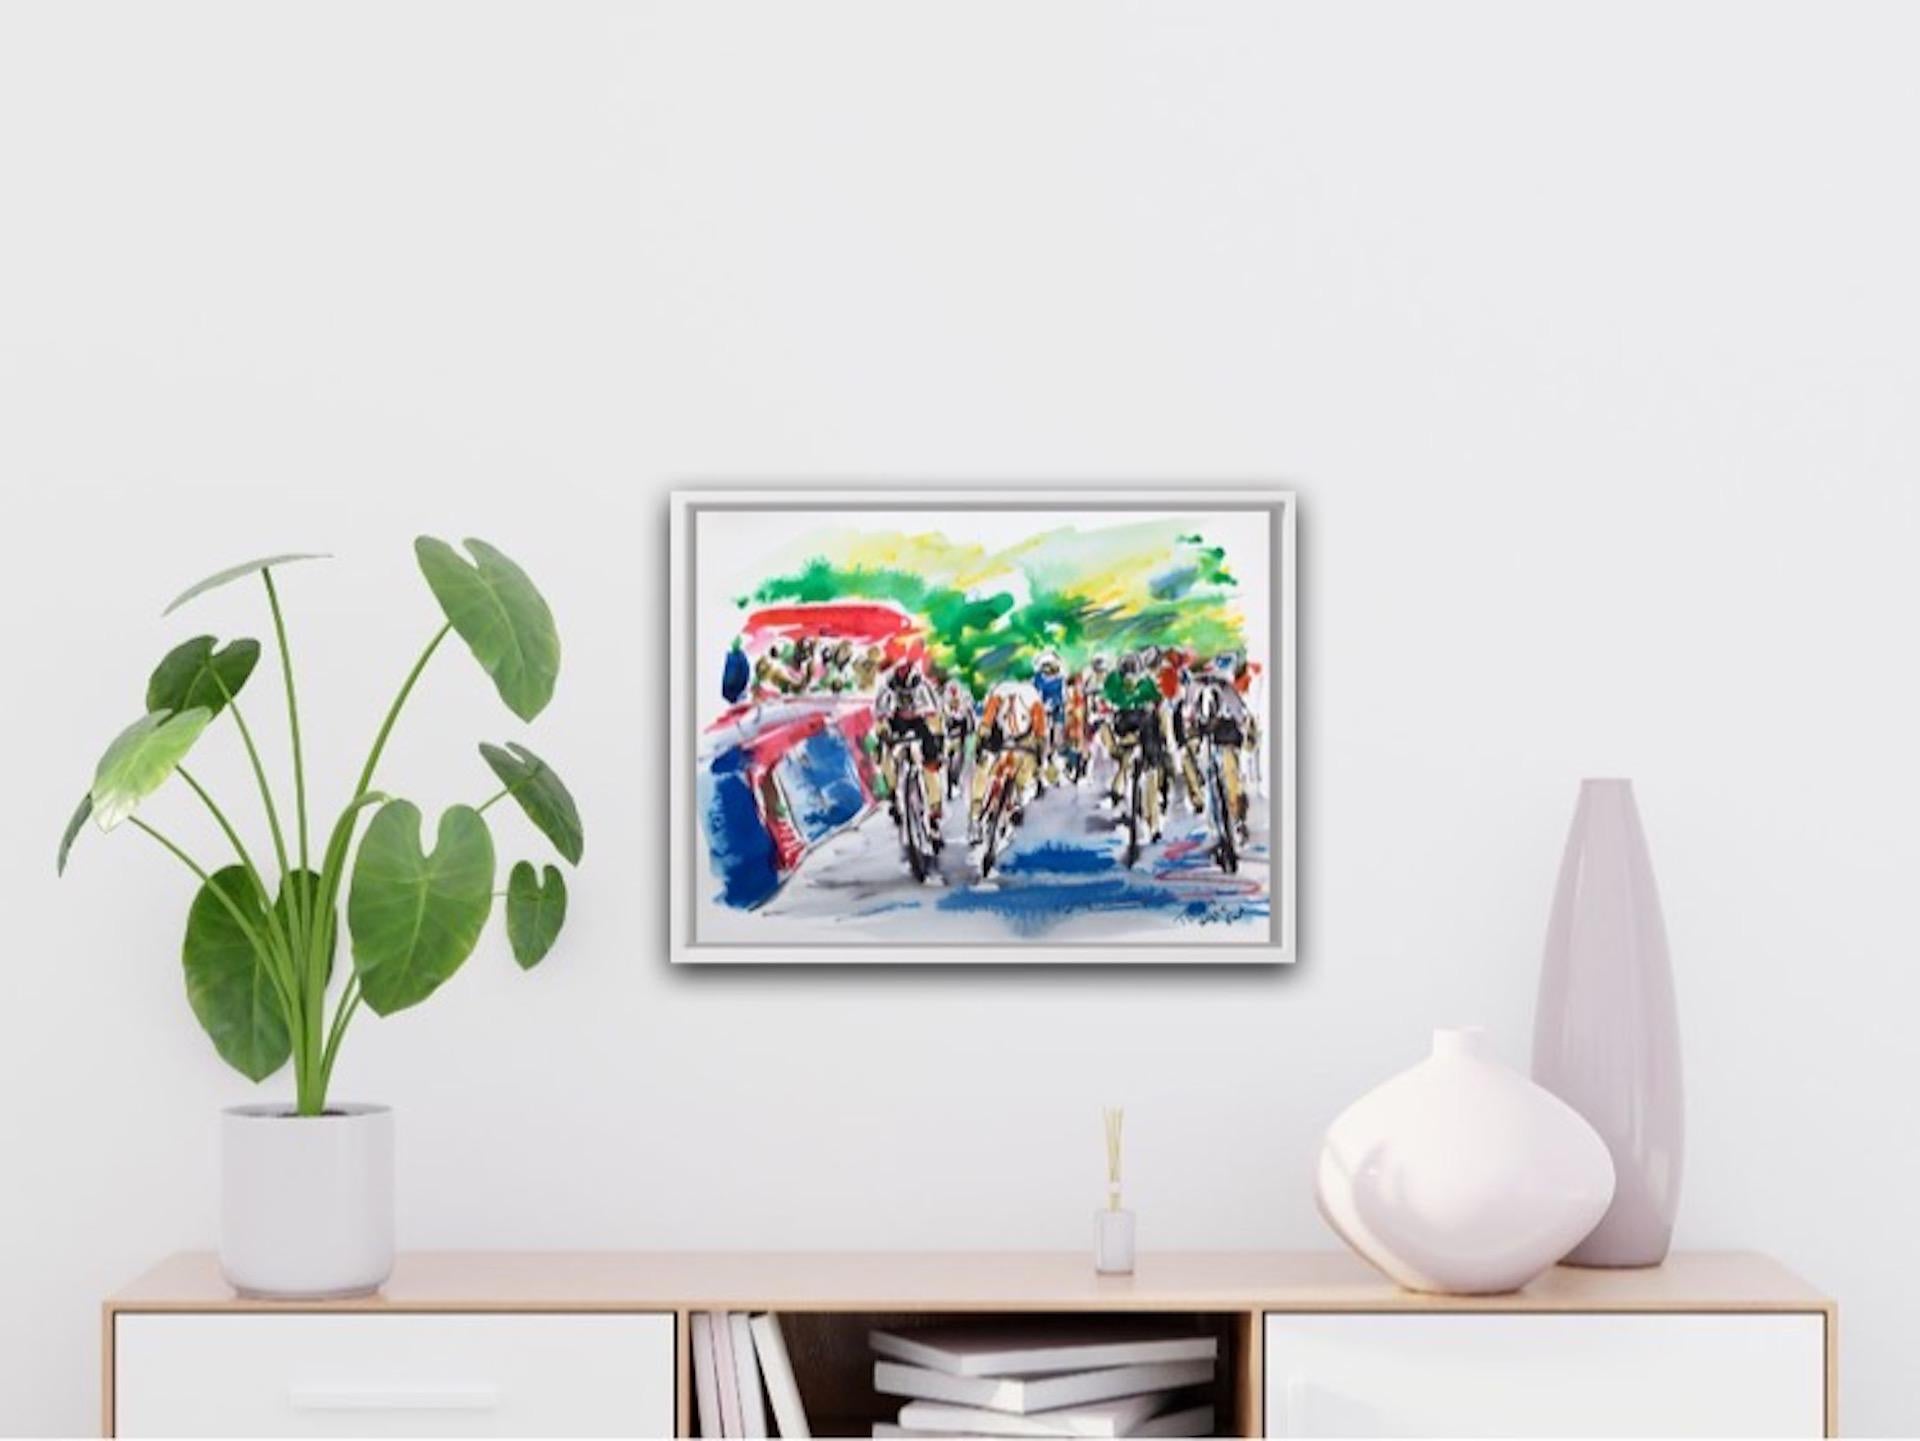 Garth Bayley
Stage 5 Tour Down Under
Original Cycling Painting
Watercolour Paint on Paper
Sheet Size: H 24cm x W 32cm x D 0.1 cm
Sold Unframed
Please note that insitu images are purely an indication of how a piece may look.

Stage 5 Tour Down Under